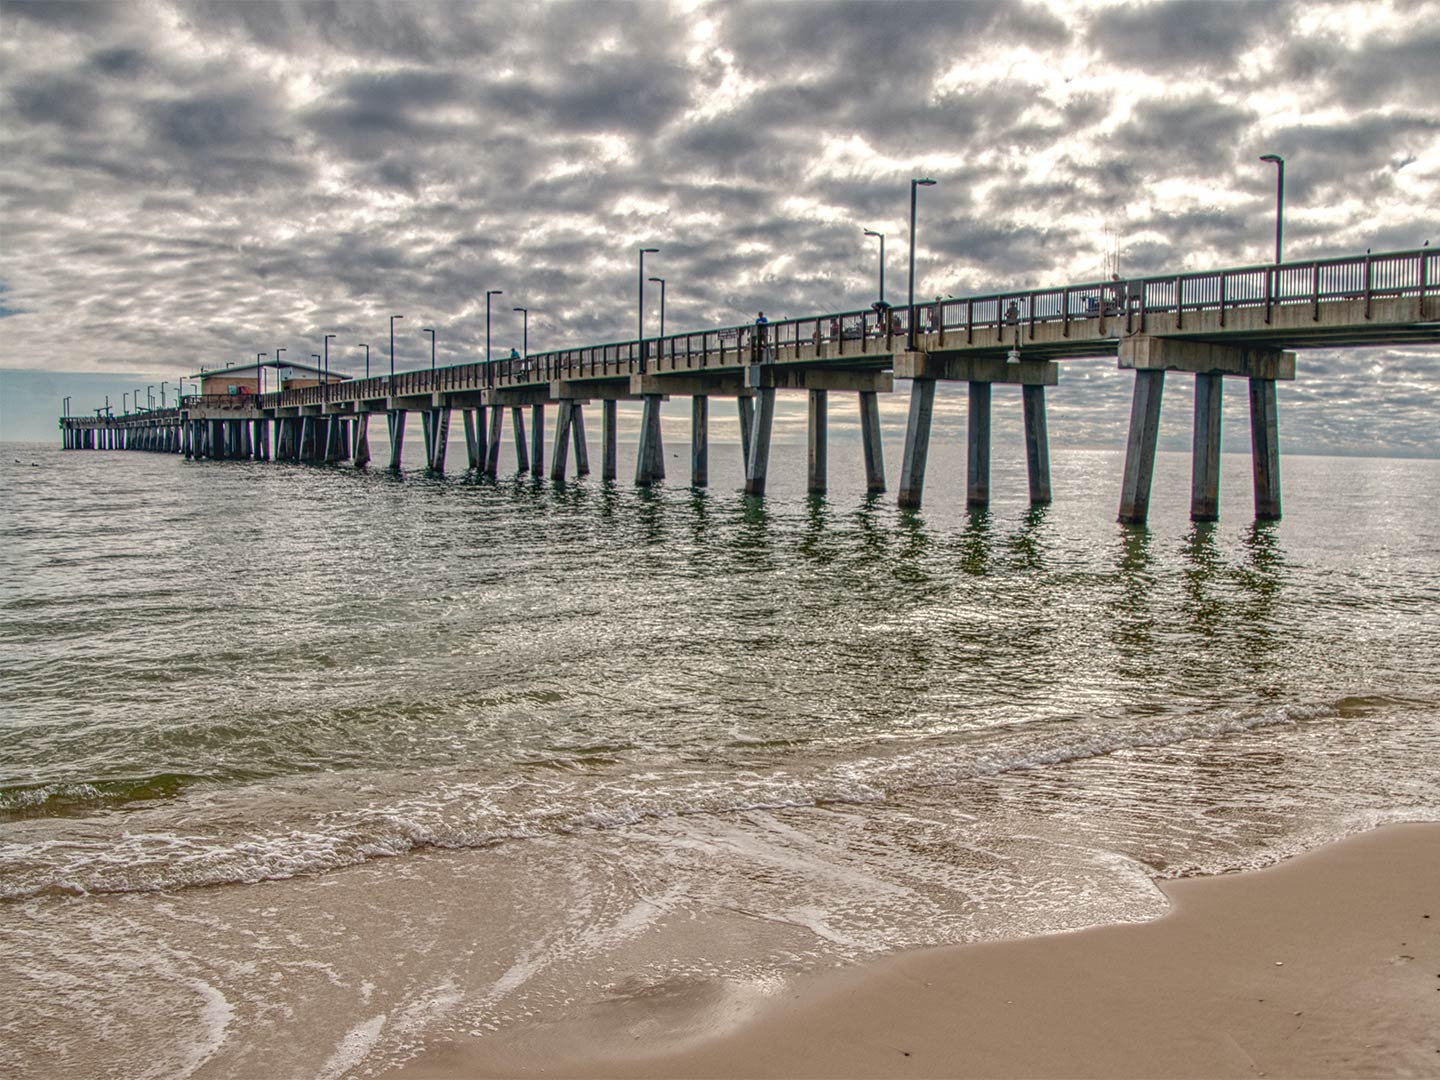 A view of the Gulf State Park Fishing Pier in Orange Beach from the beach on a cloudy day